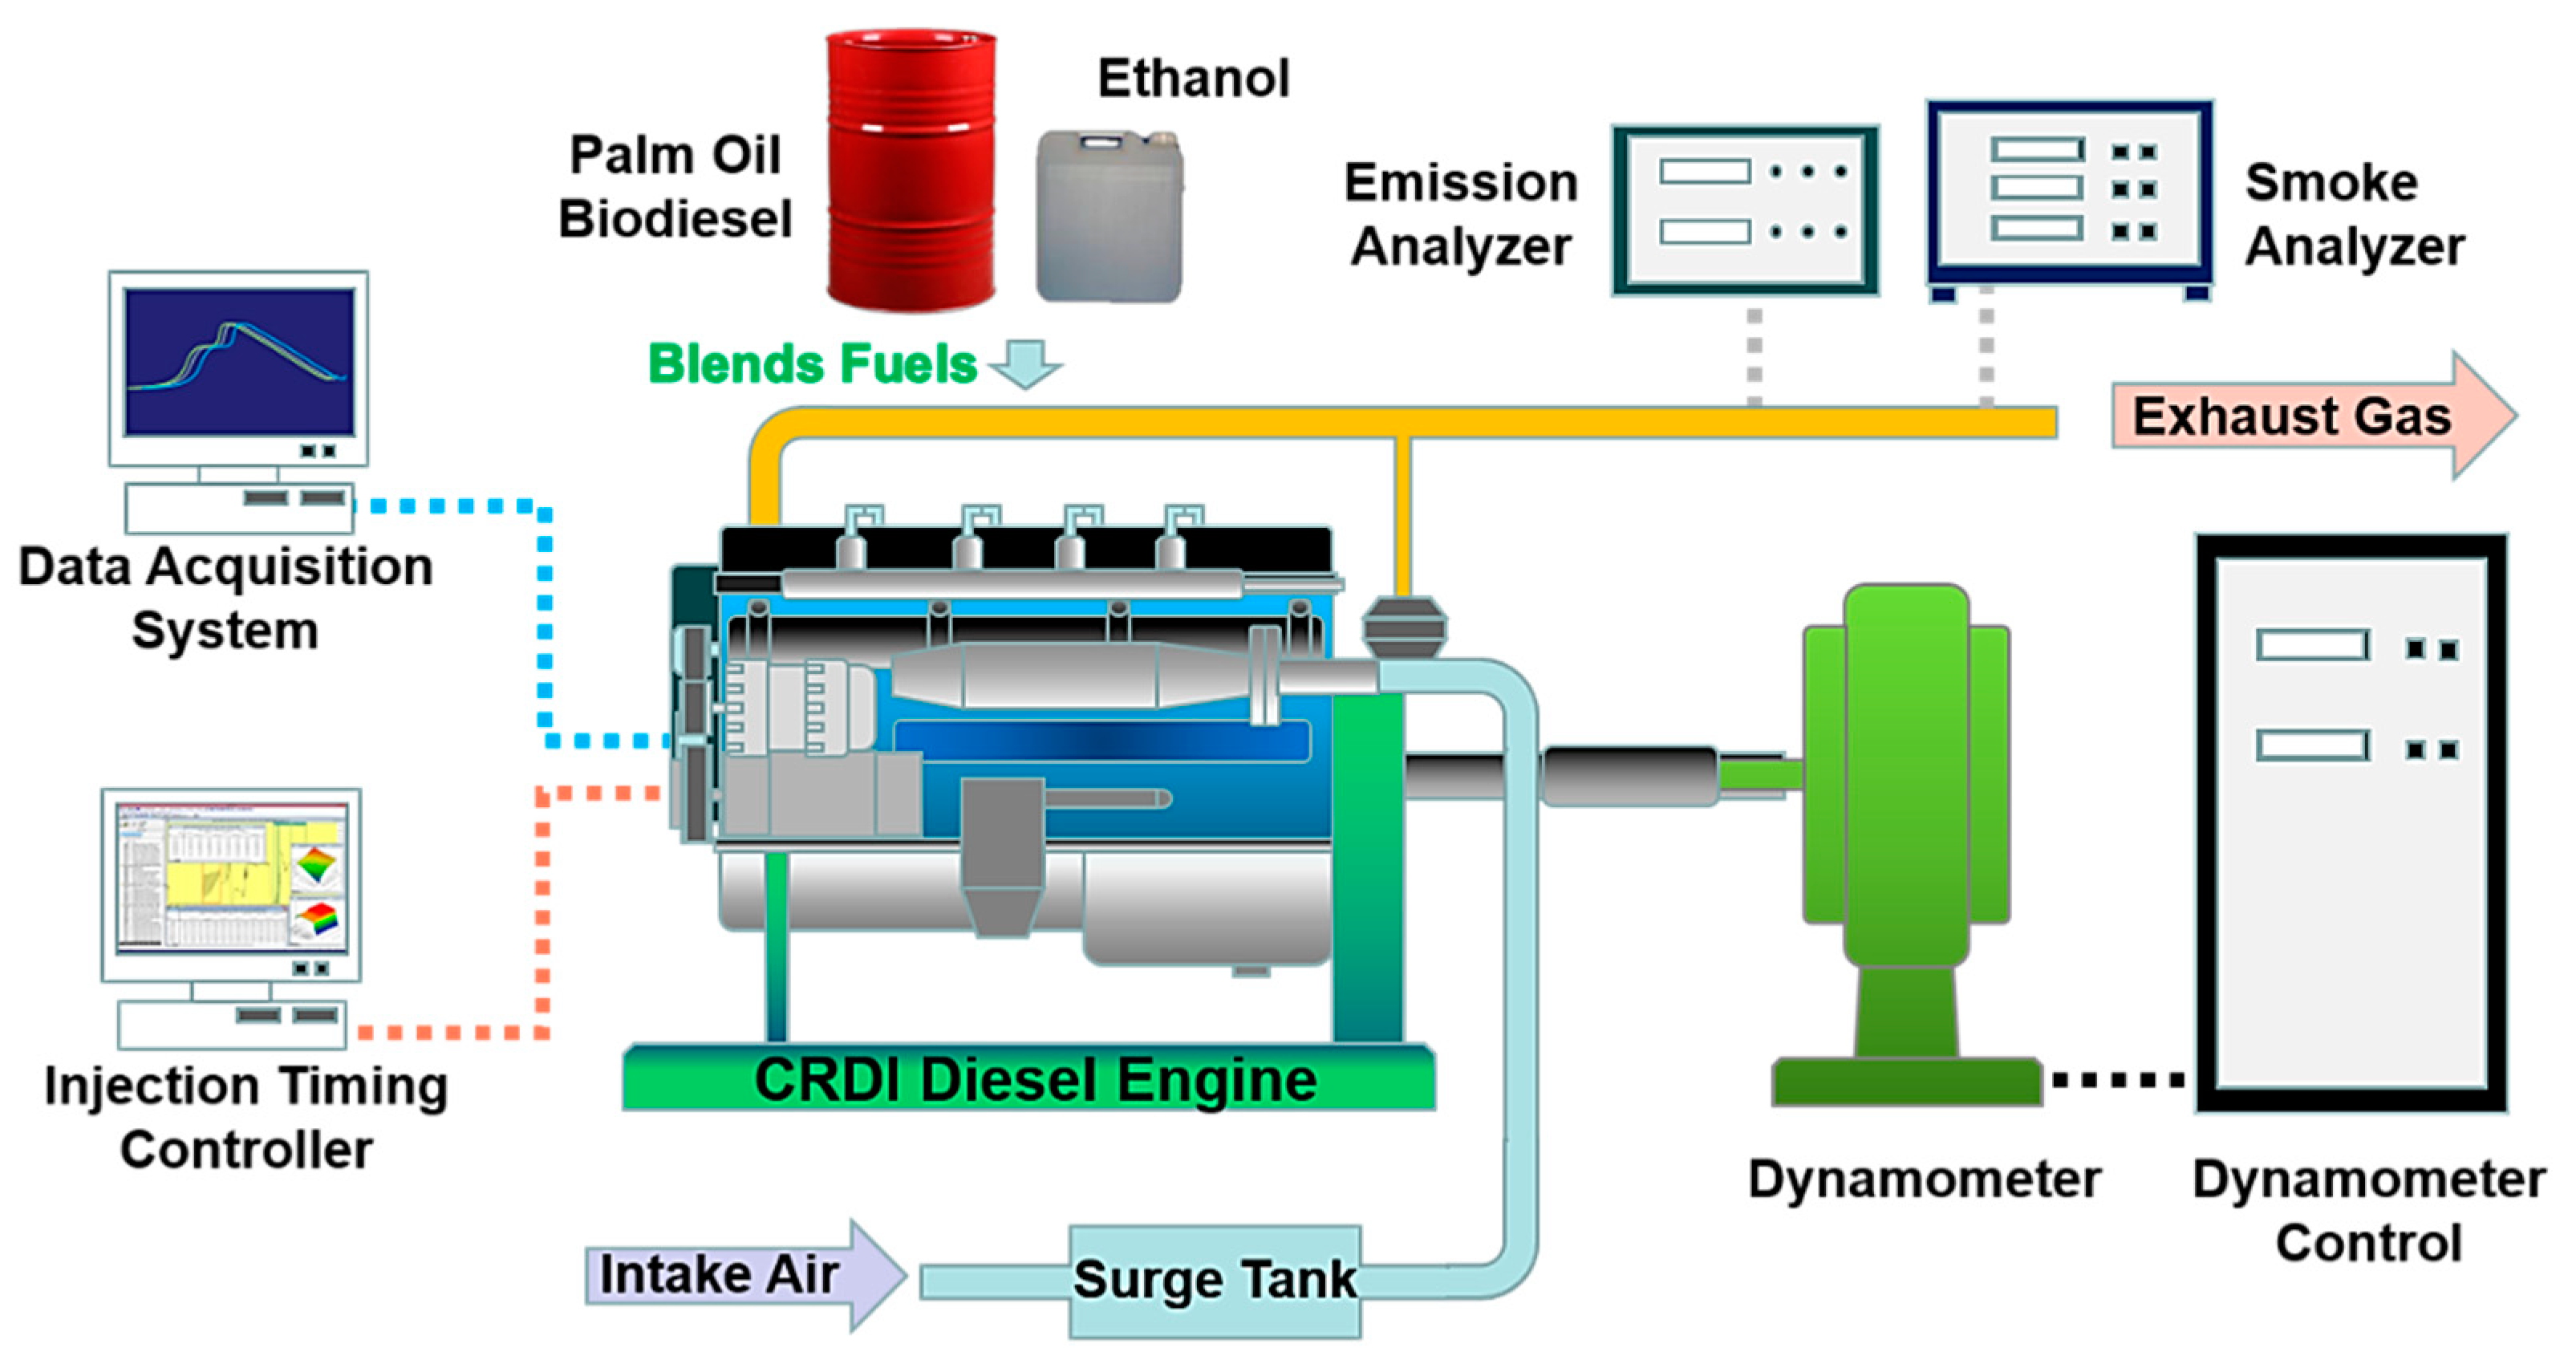 Ethanol as a Renewable Building Block for Fuels and Chemicals